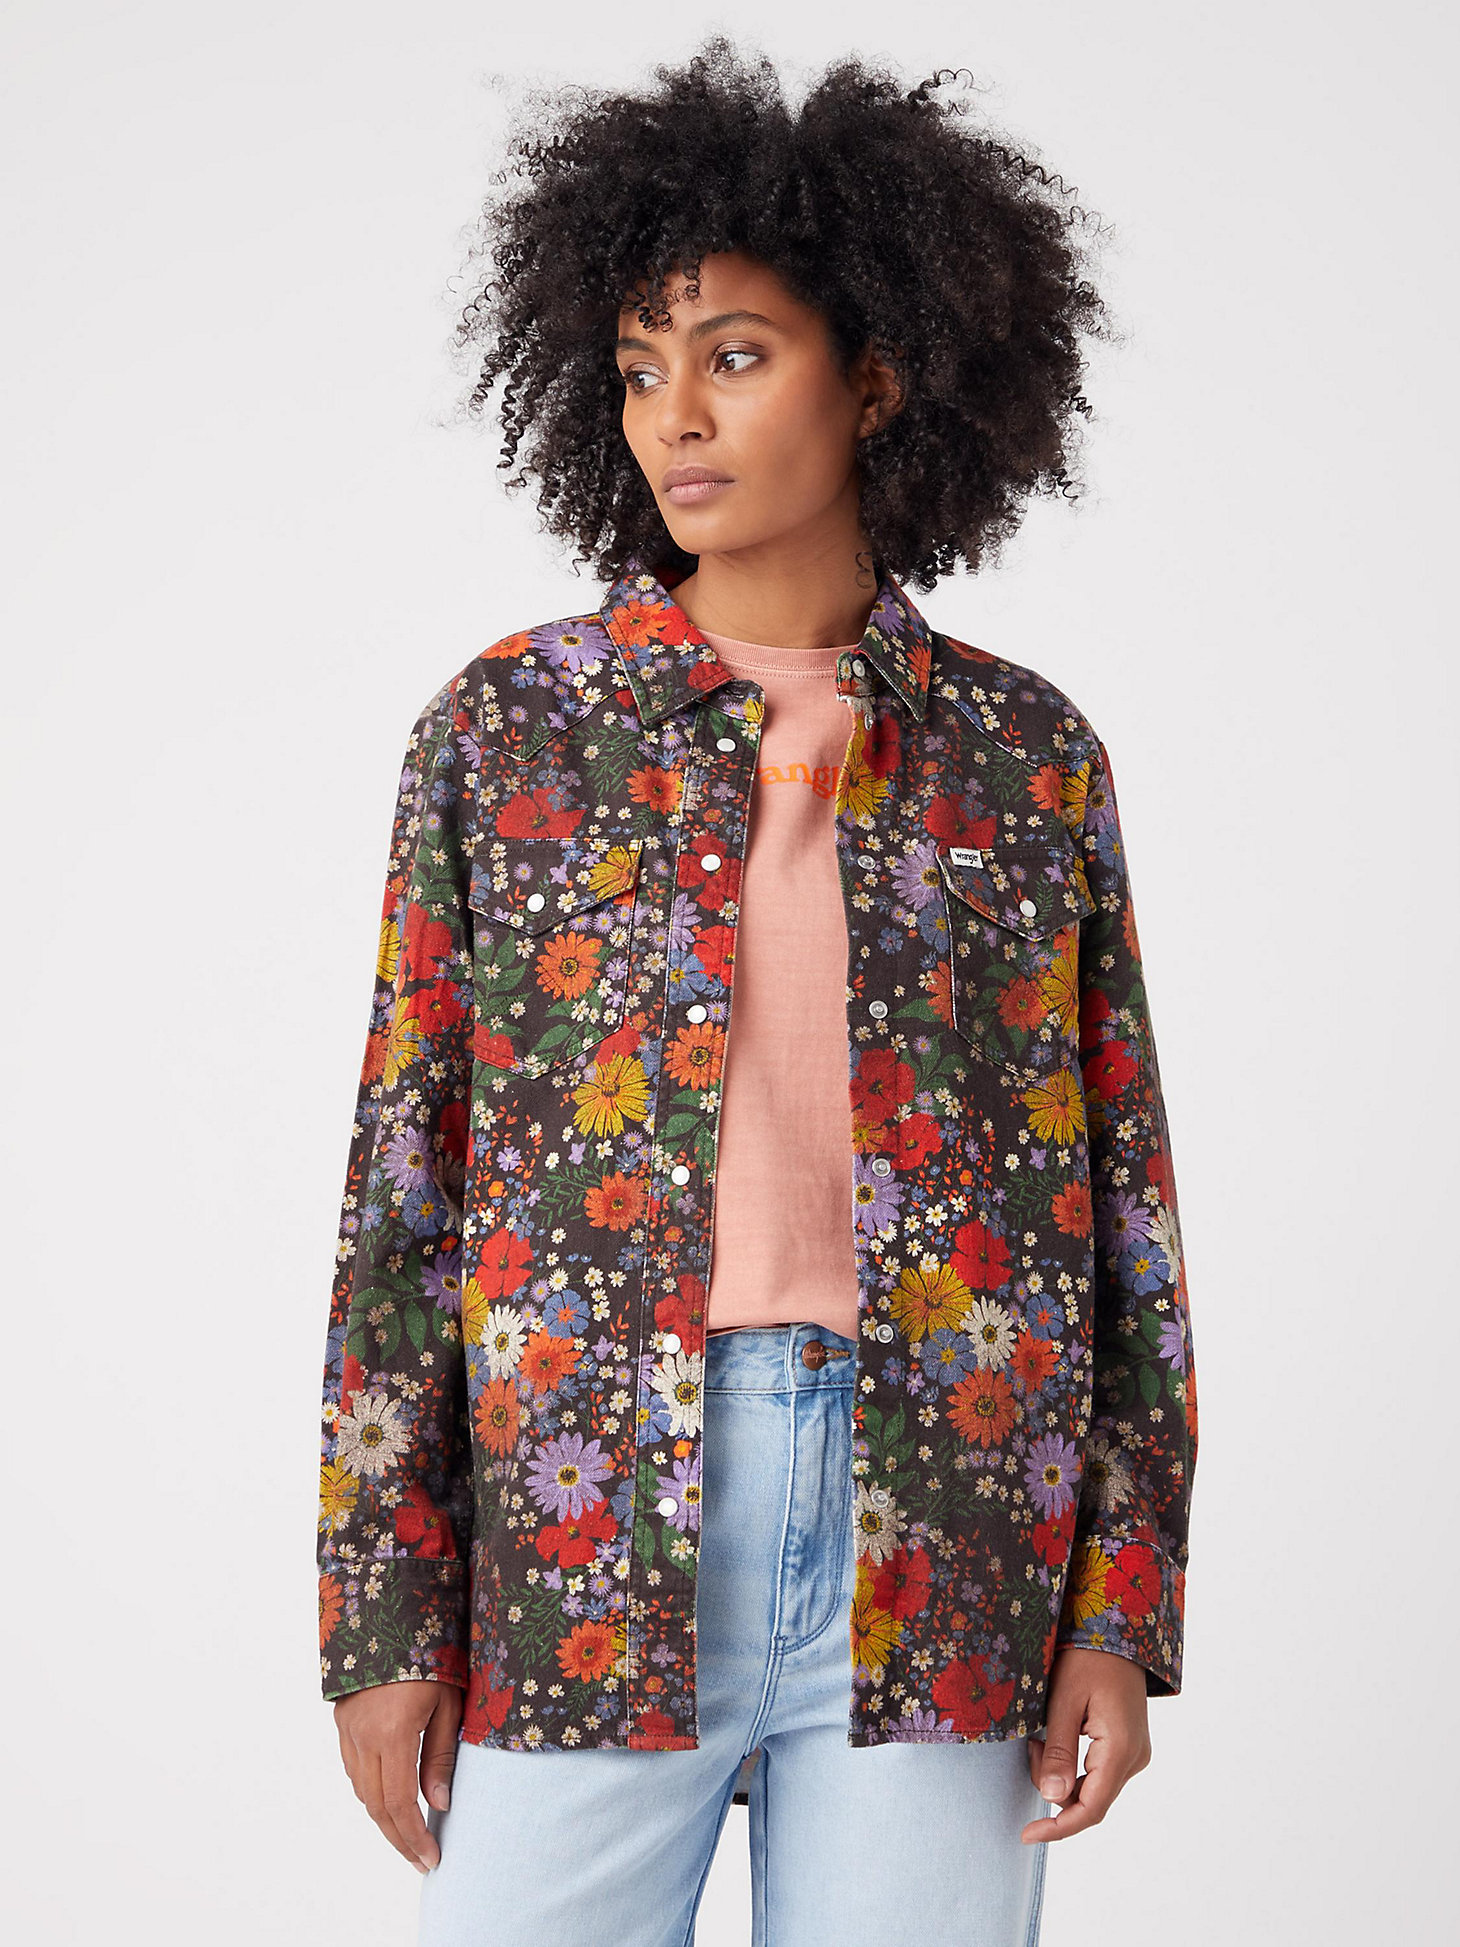 Women's Floral Print Heritage Shirt in Bloom main view